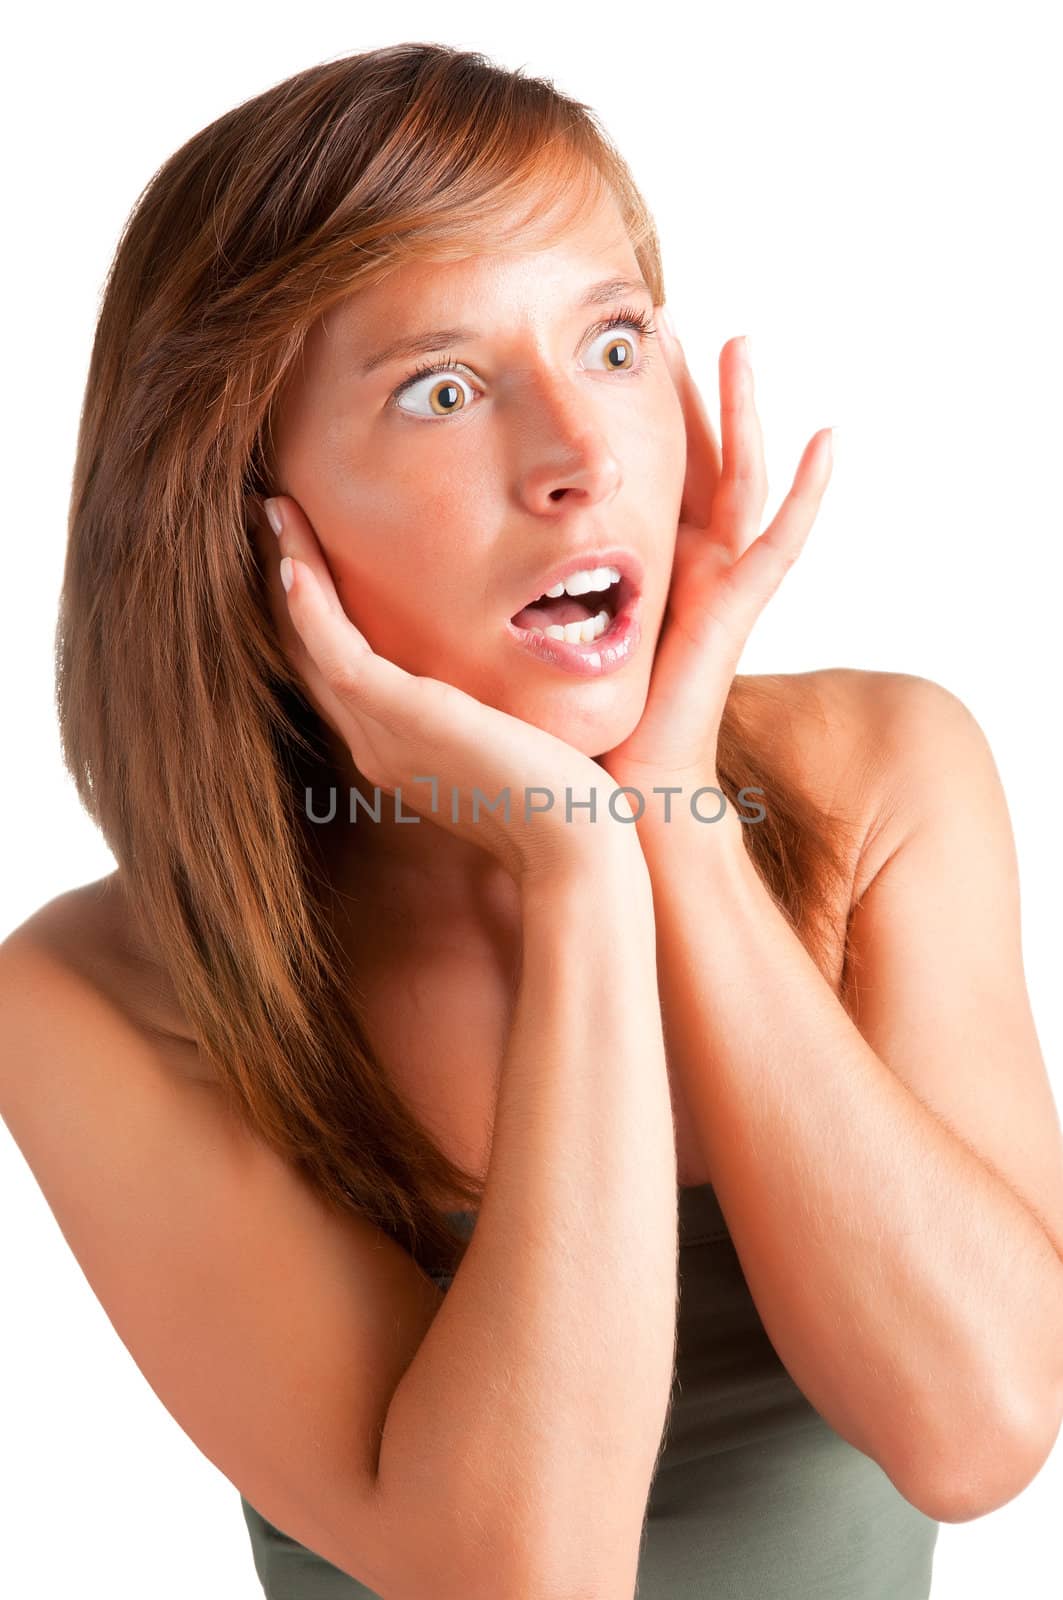 Surprised woman with her hands around her face, isolated in white